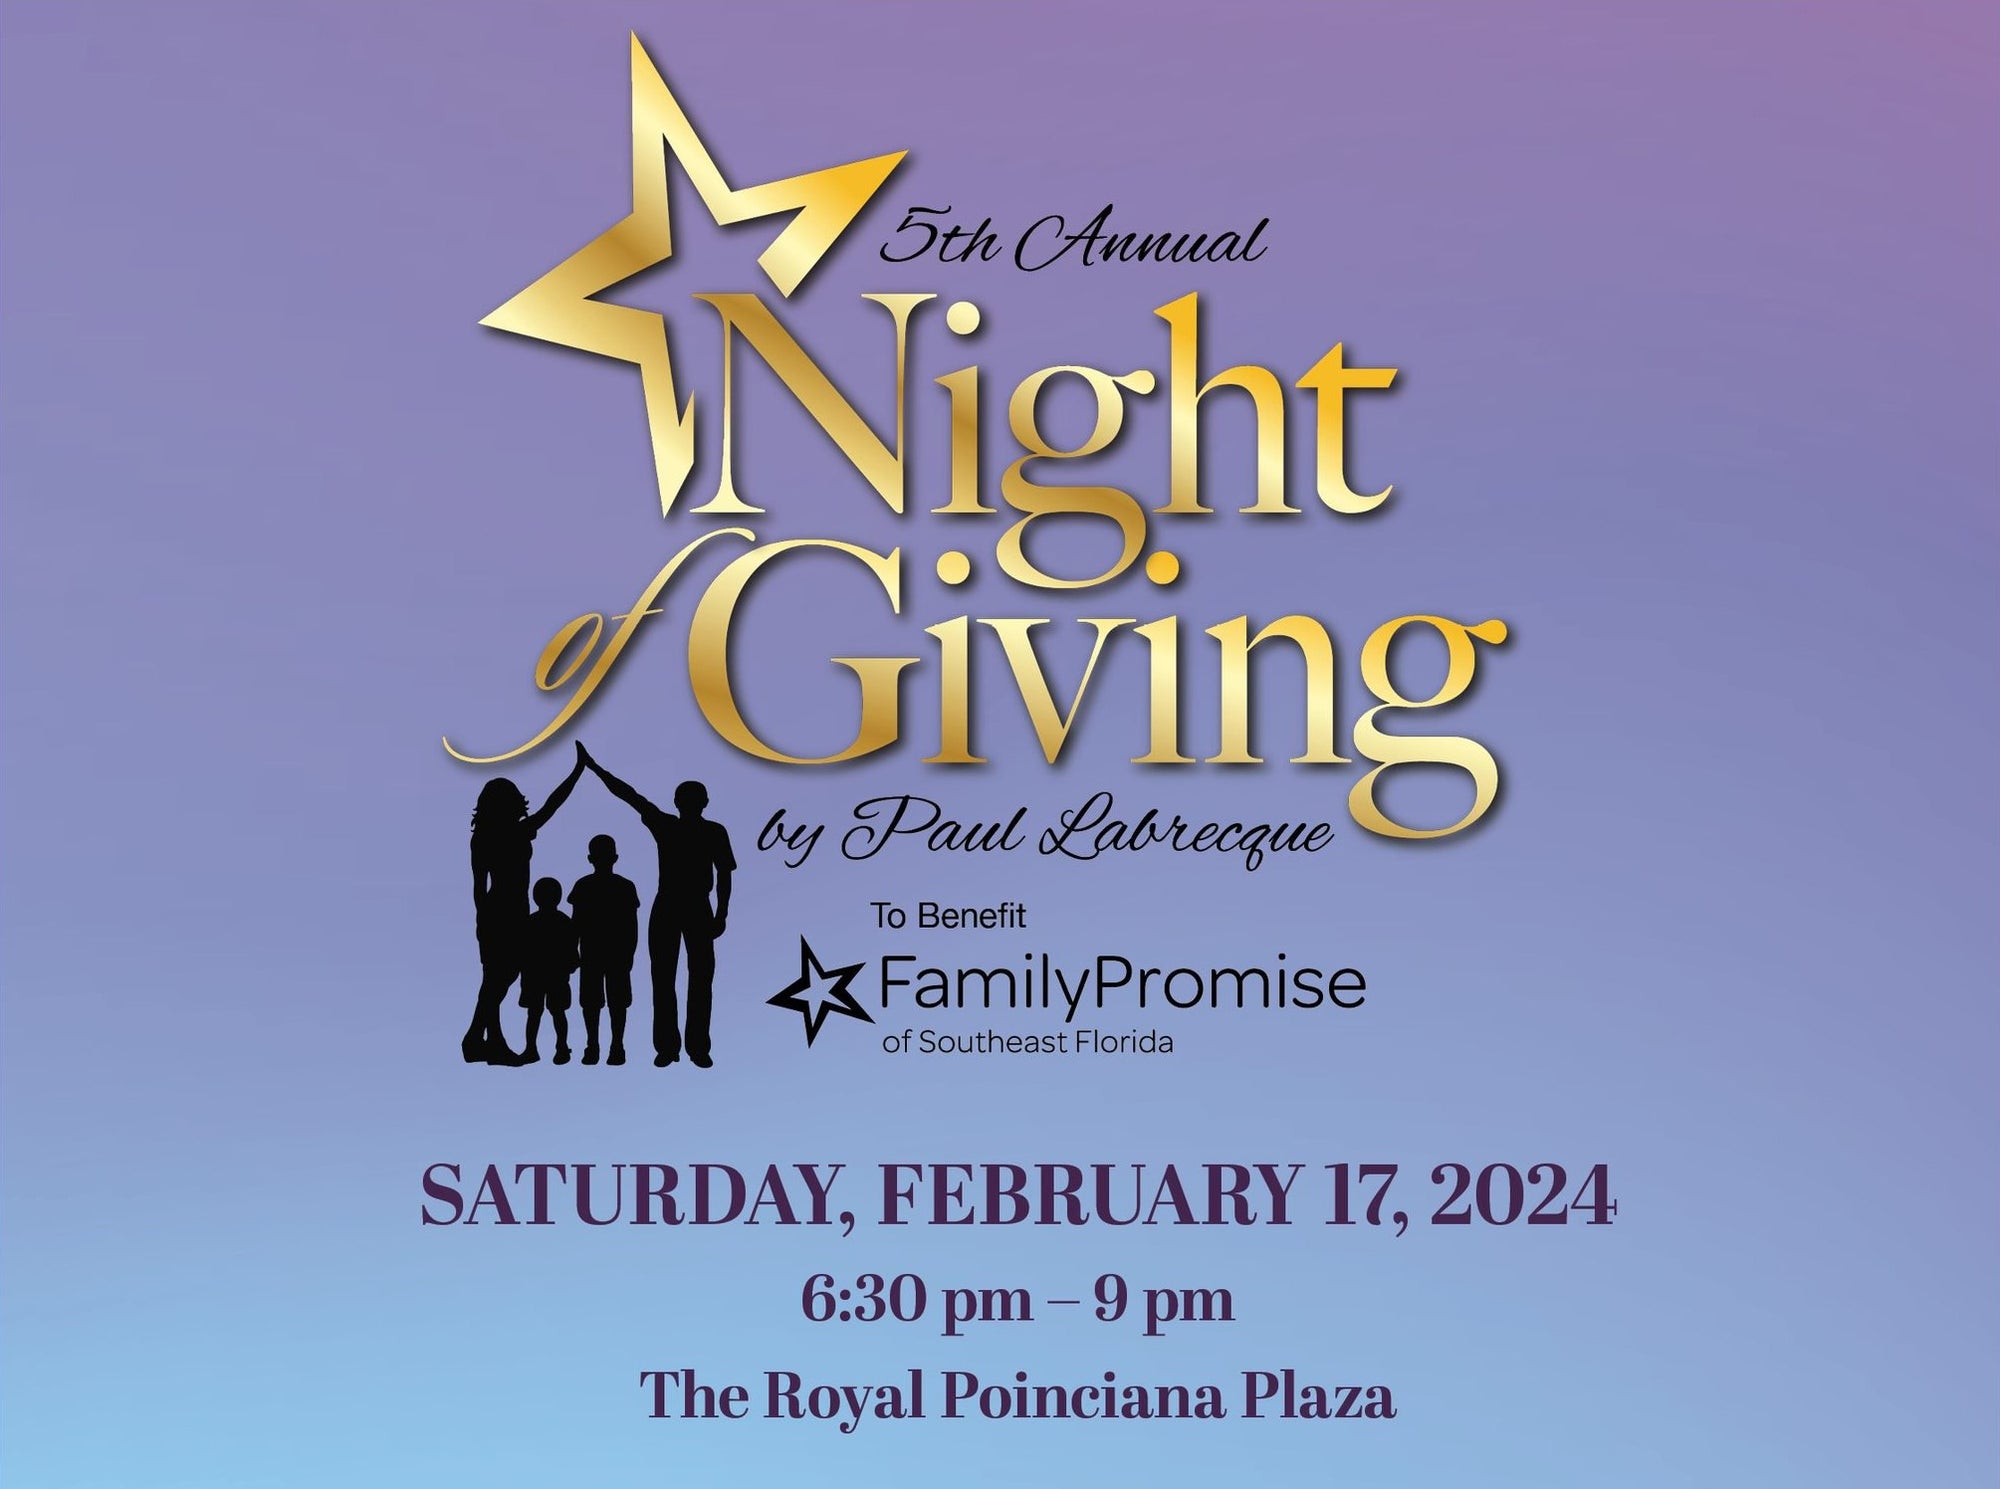 The Palm Beach 5th Annual Night of Giving - Save The Date Saturday, February 17th